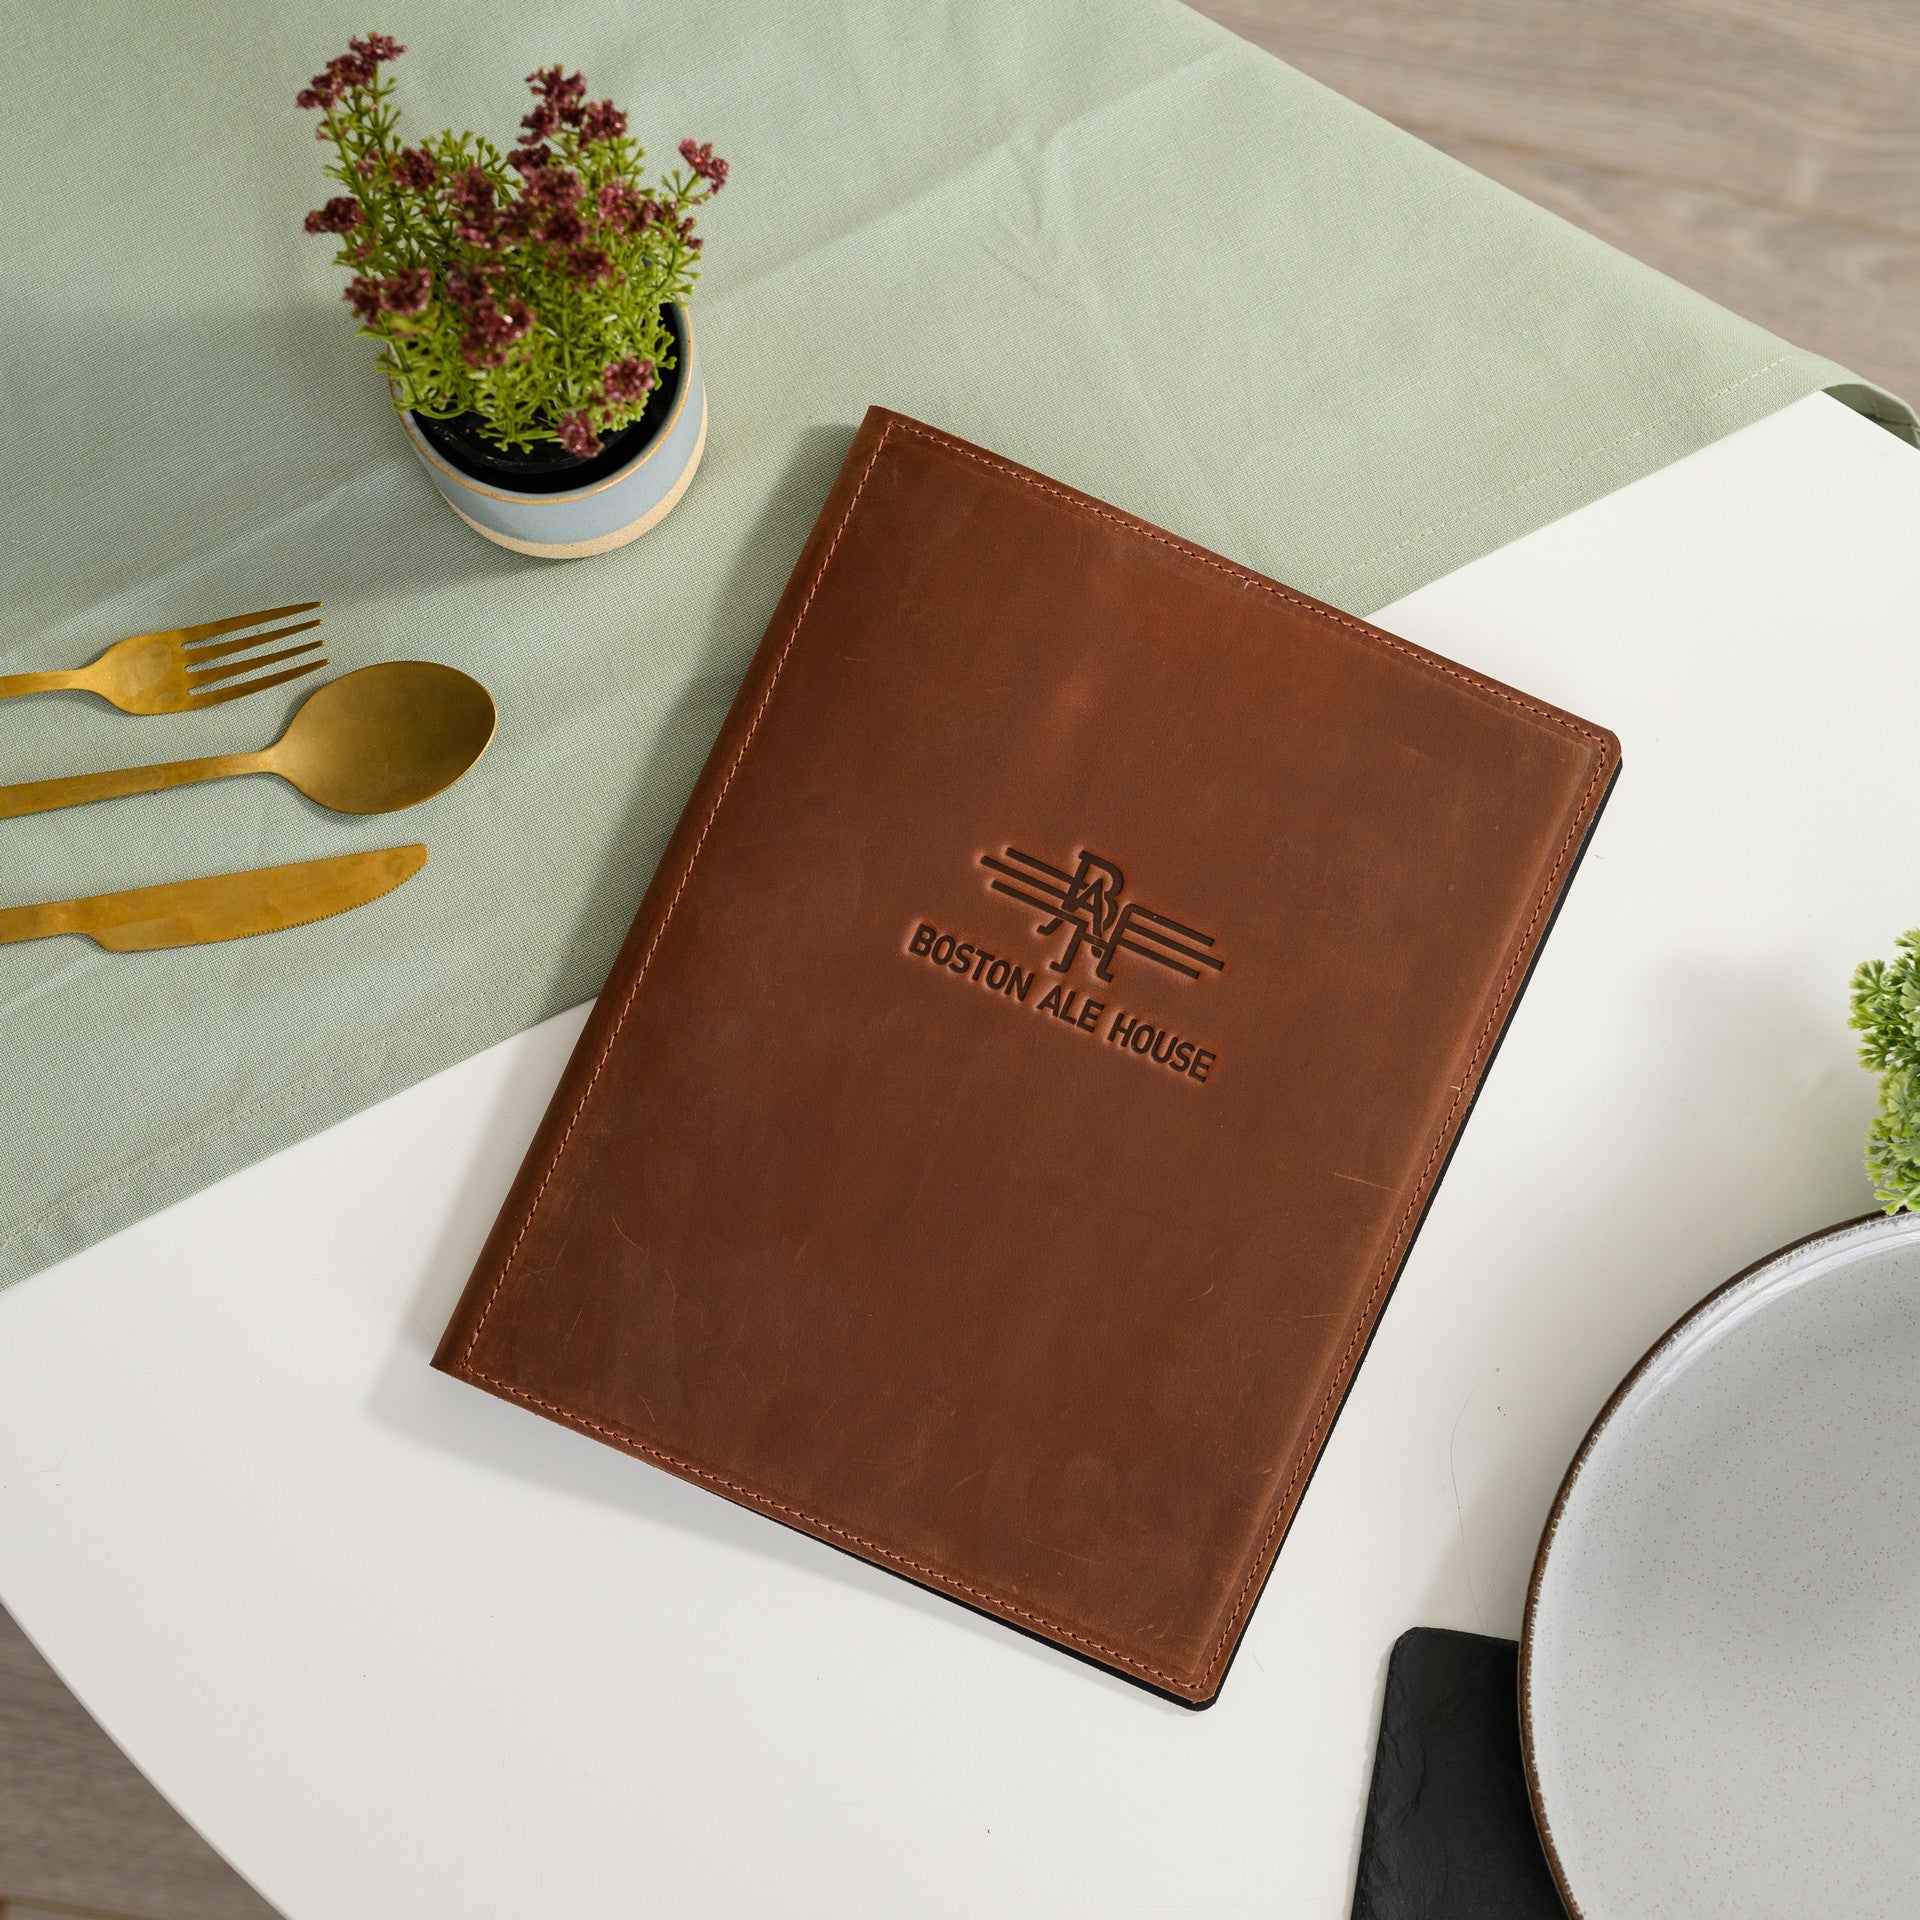 Impress guests with our customized menu folder, designed to reflect your unique brand identity.